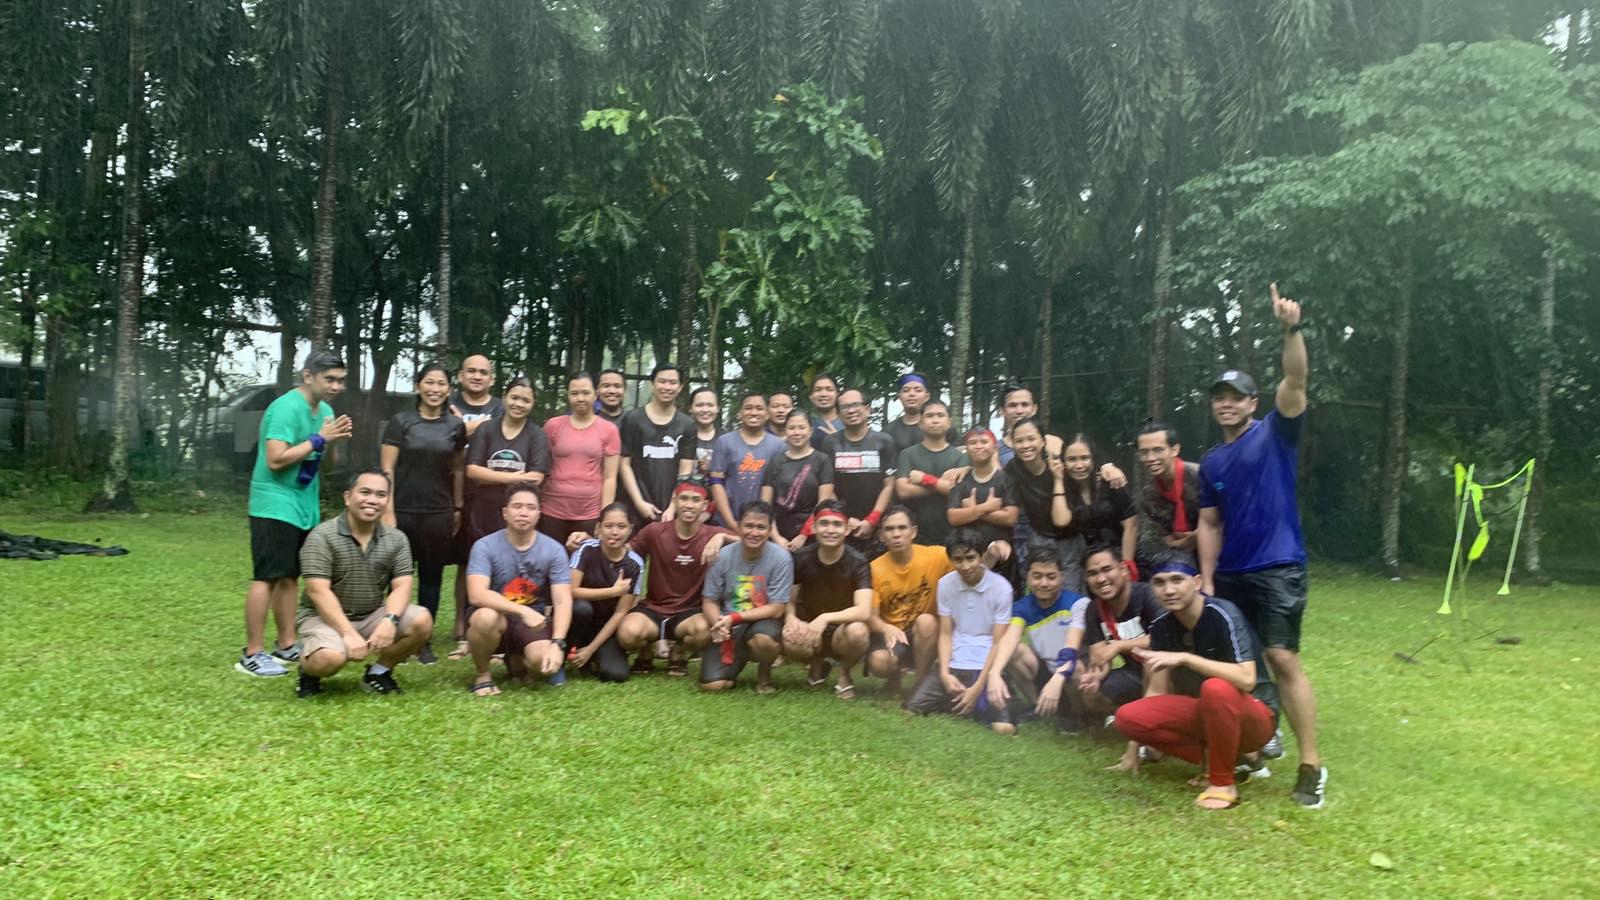 Embedded Silicon Technology Solutions Corp Team Building at Forest Club